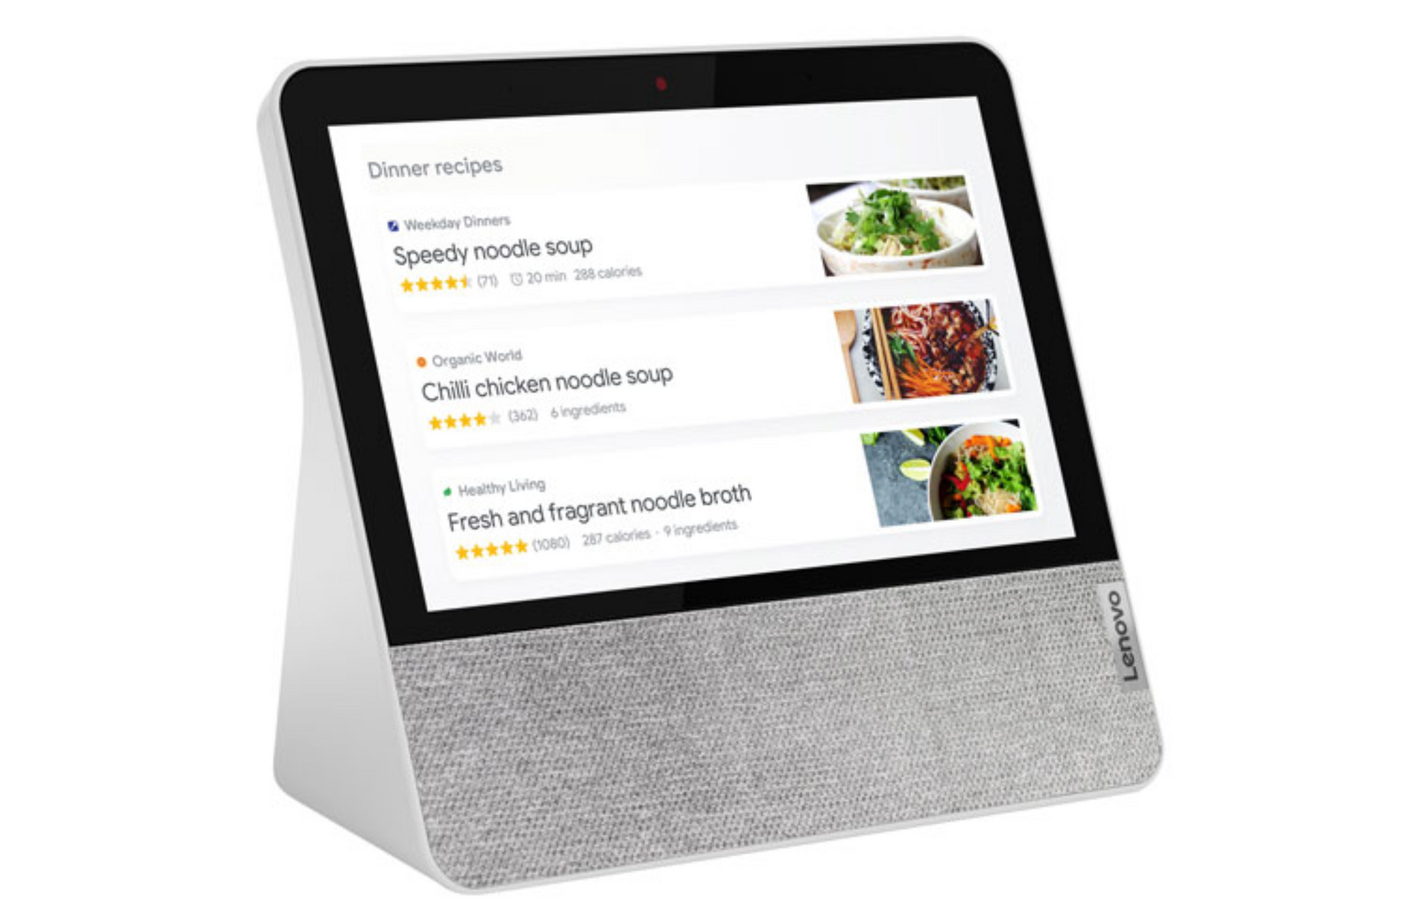 image of the Lenovo Smart Display showing a list of recipes